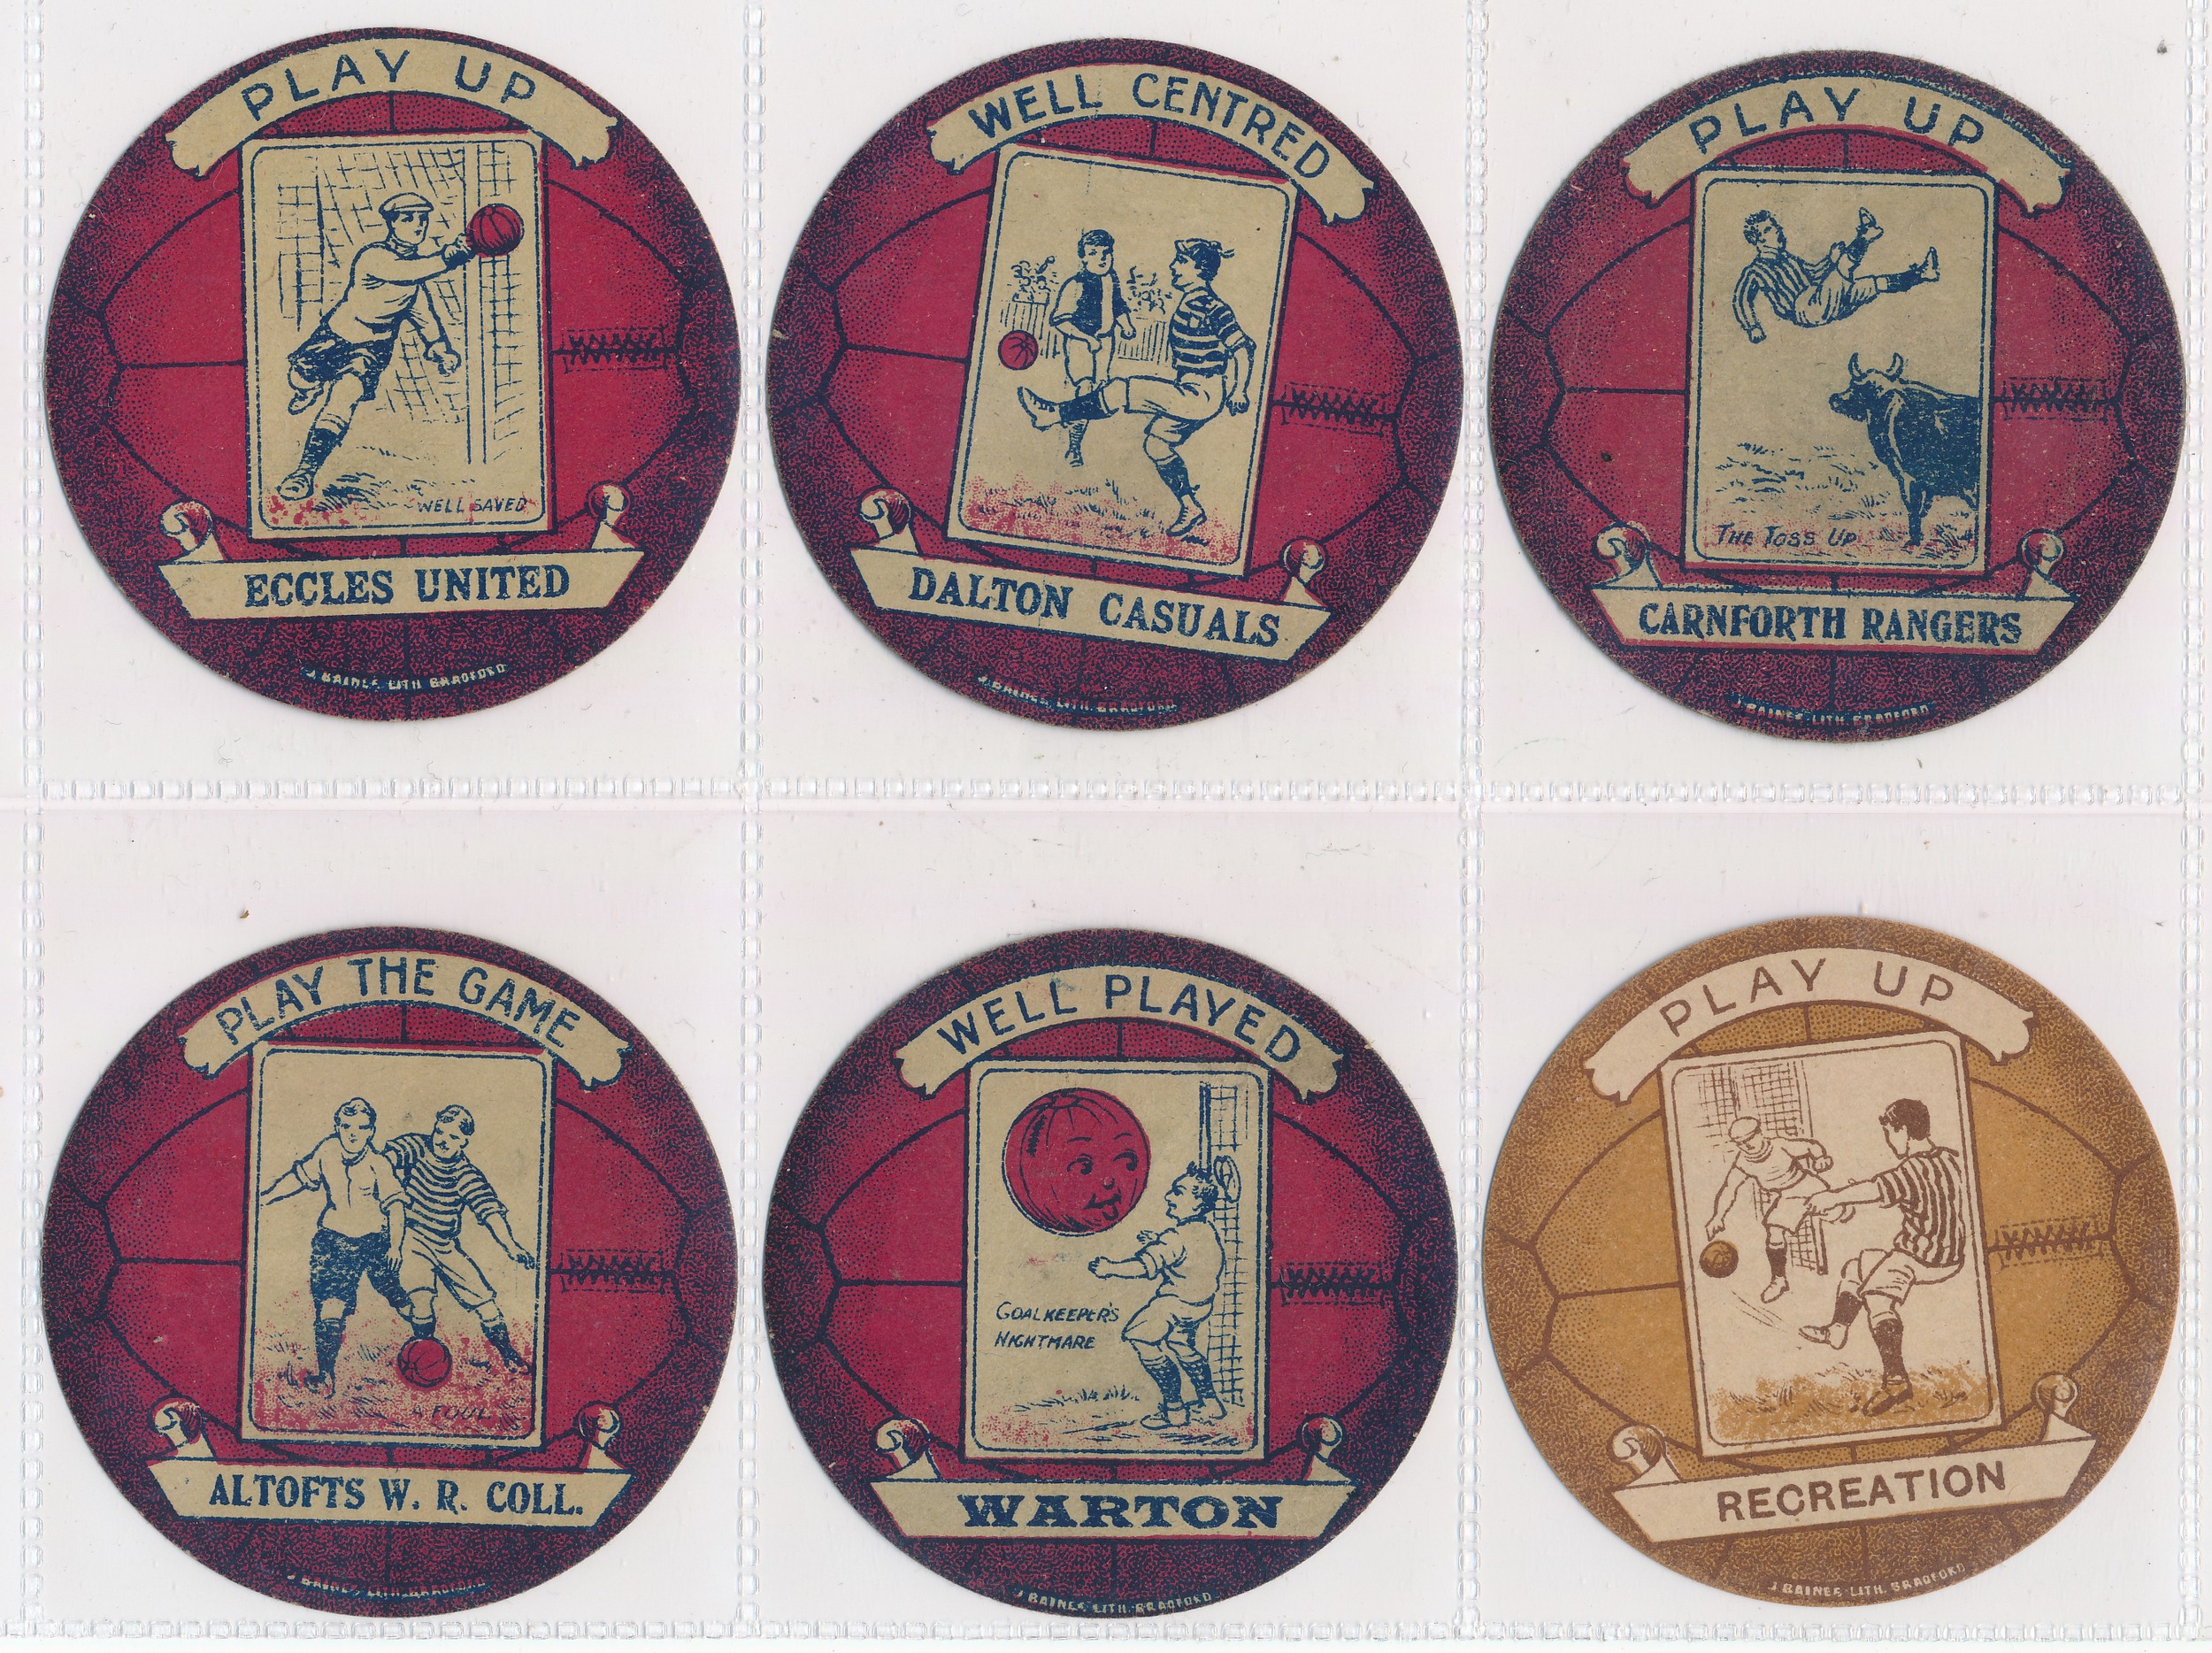 Baines trade cards, circular football shaped (10) with Eccles United, Dalton Casuals, Carnforth